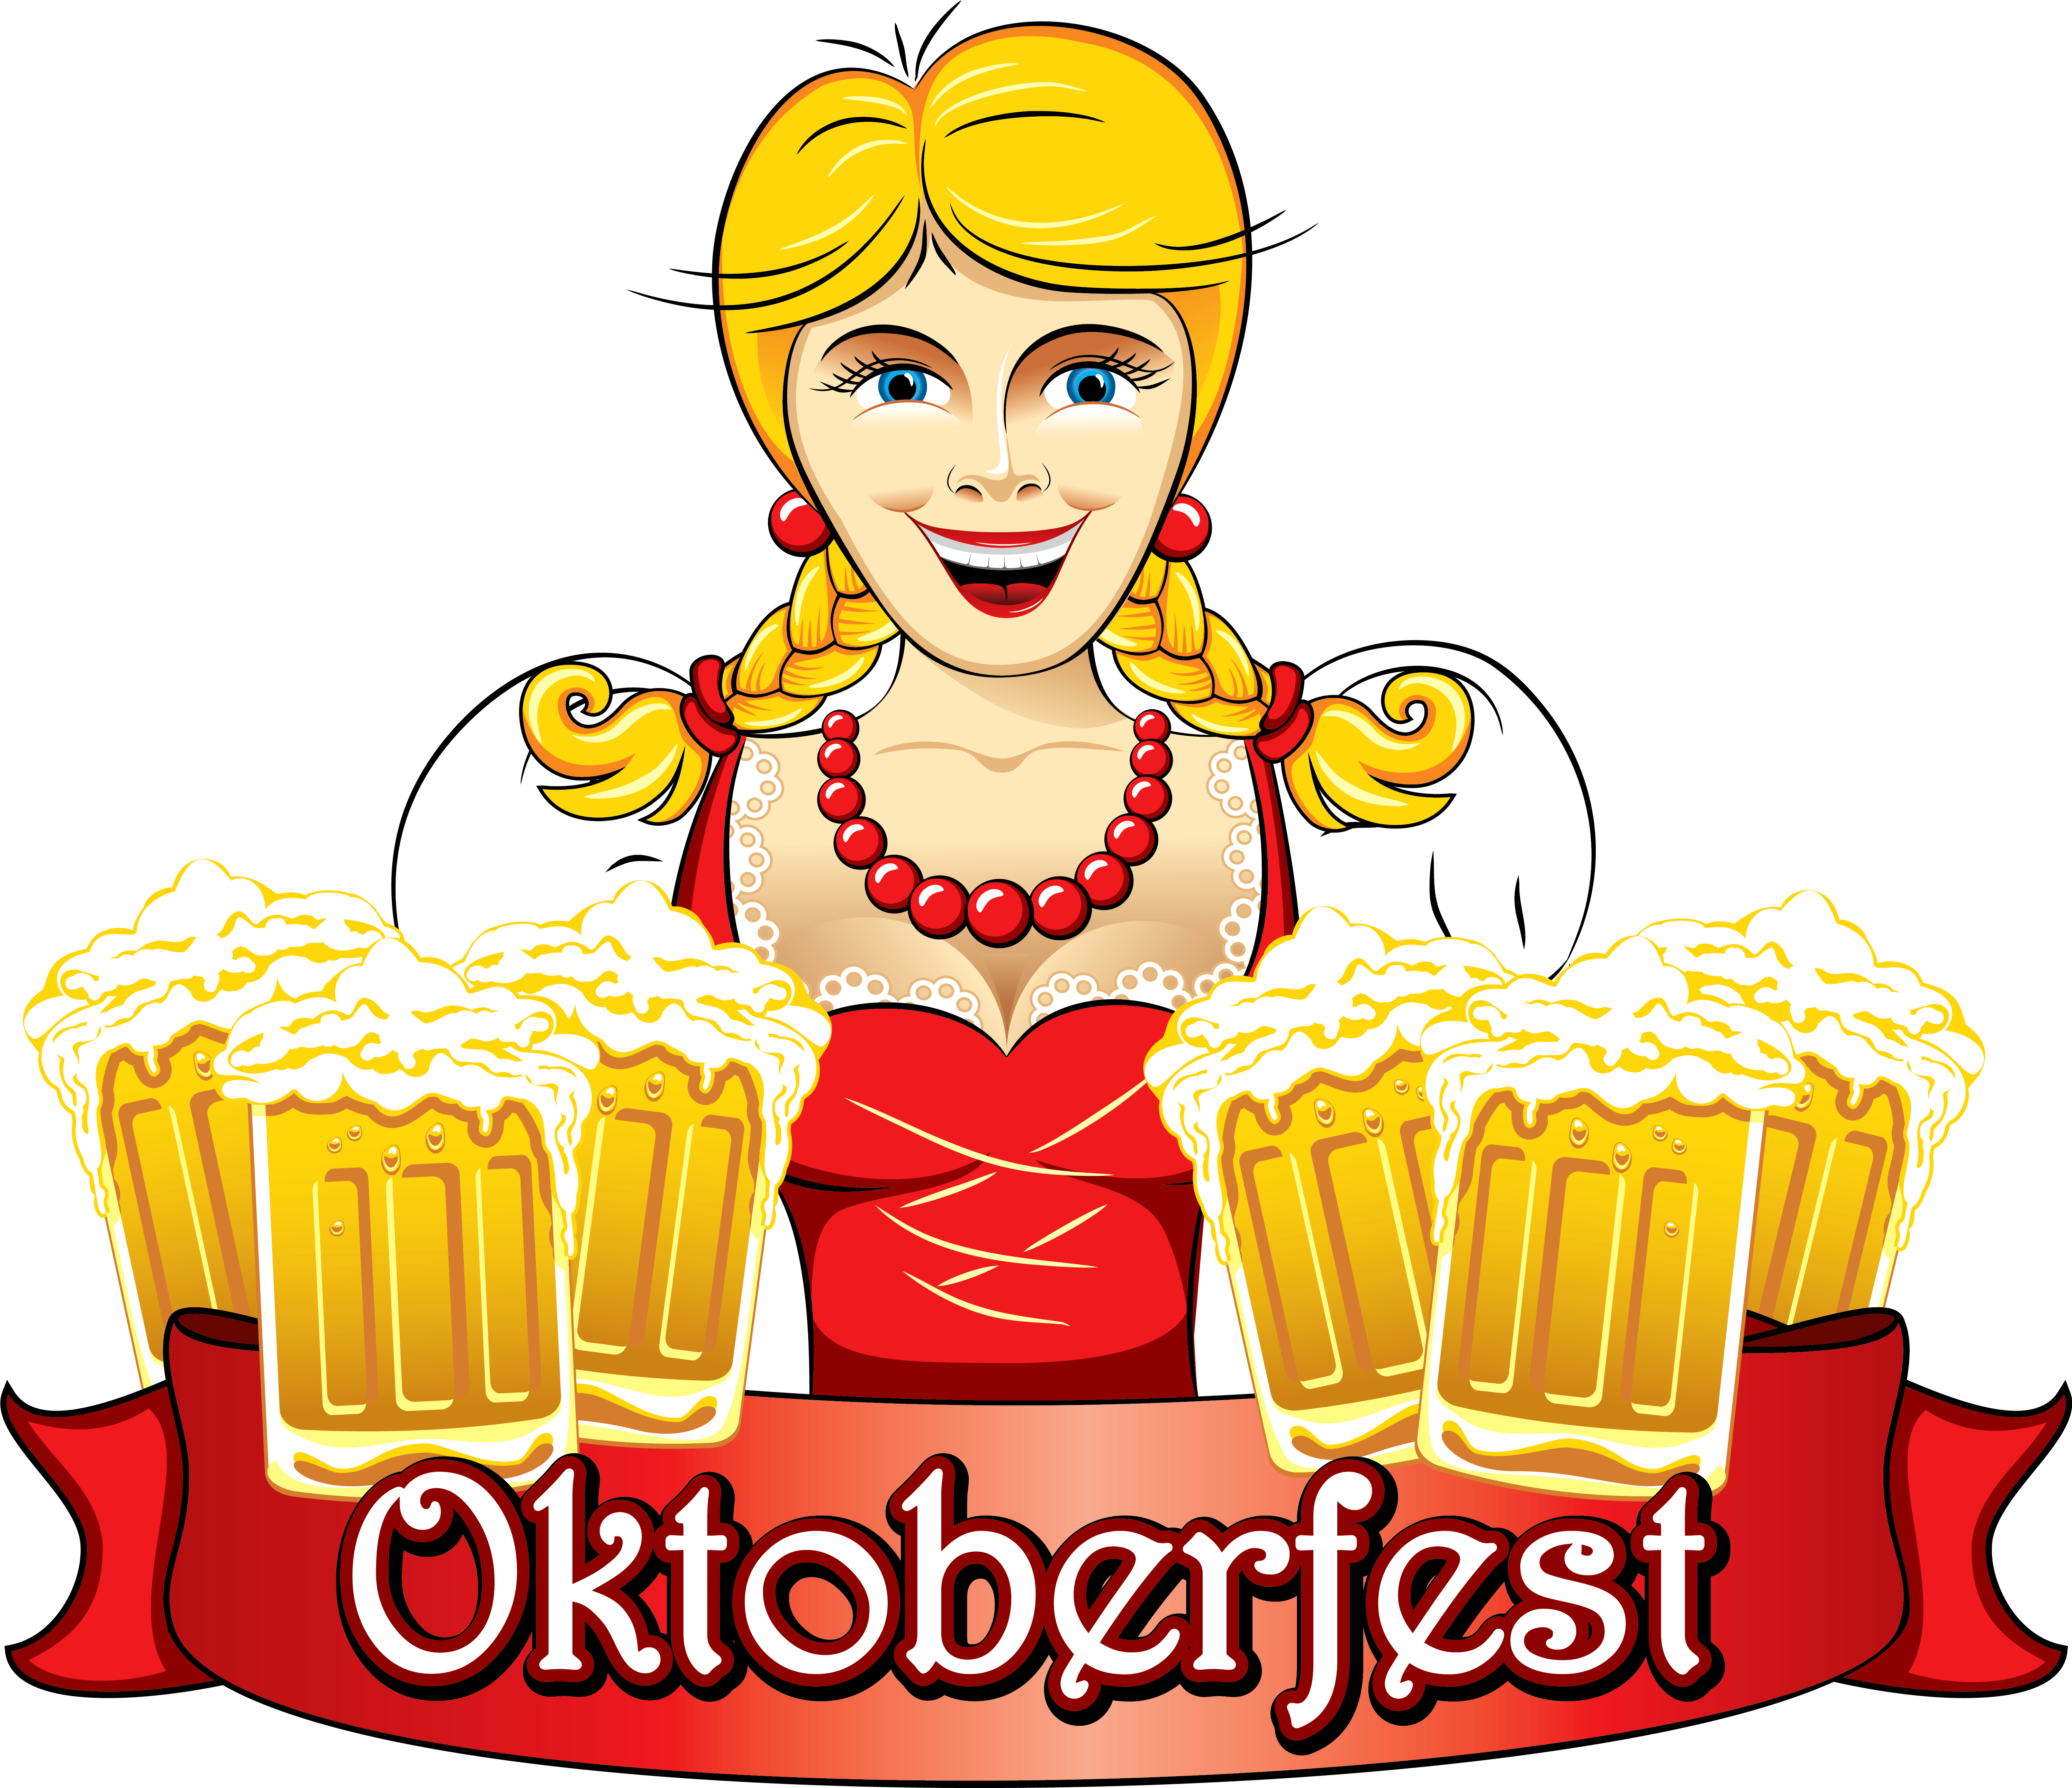 A Cartoon Of A Woman With A Red Dress And A Red Ribbon With Beer